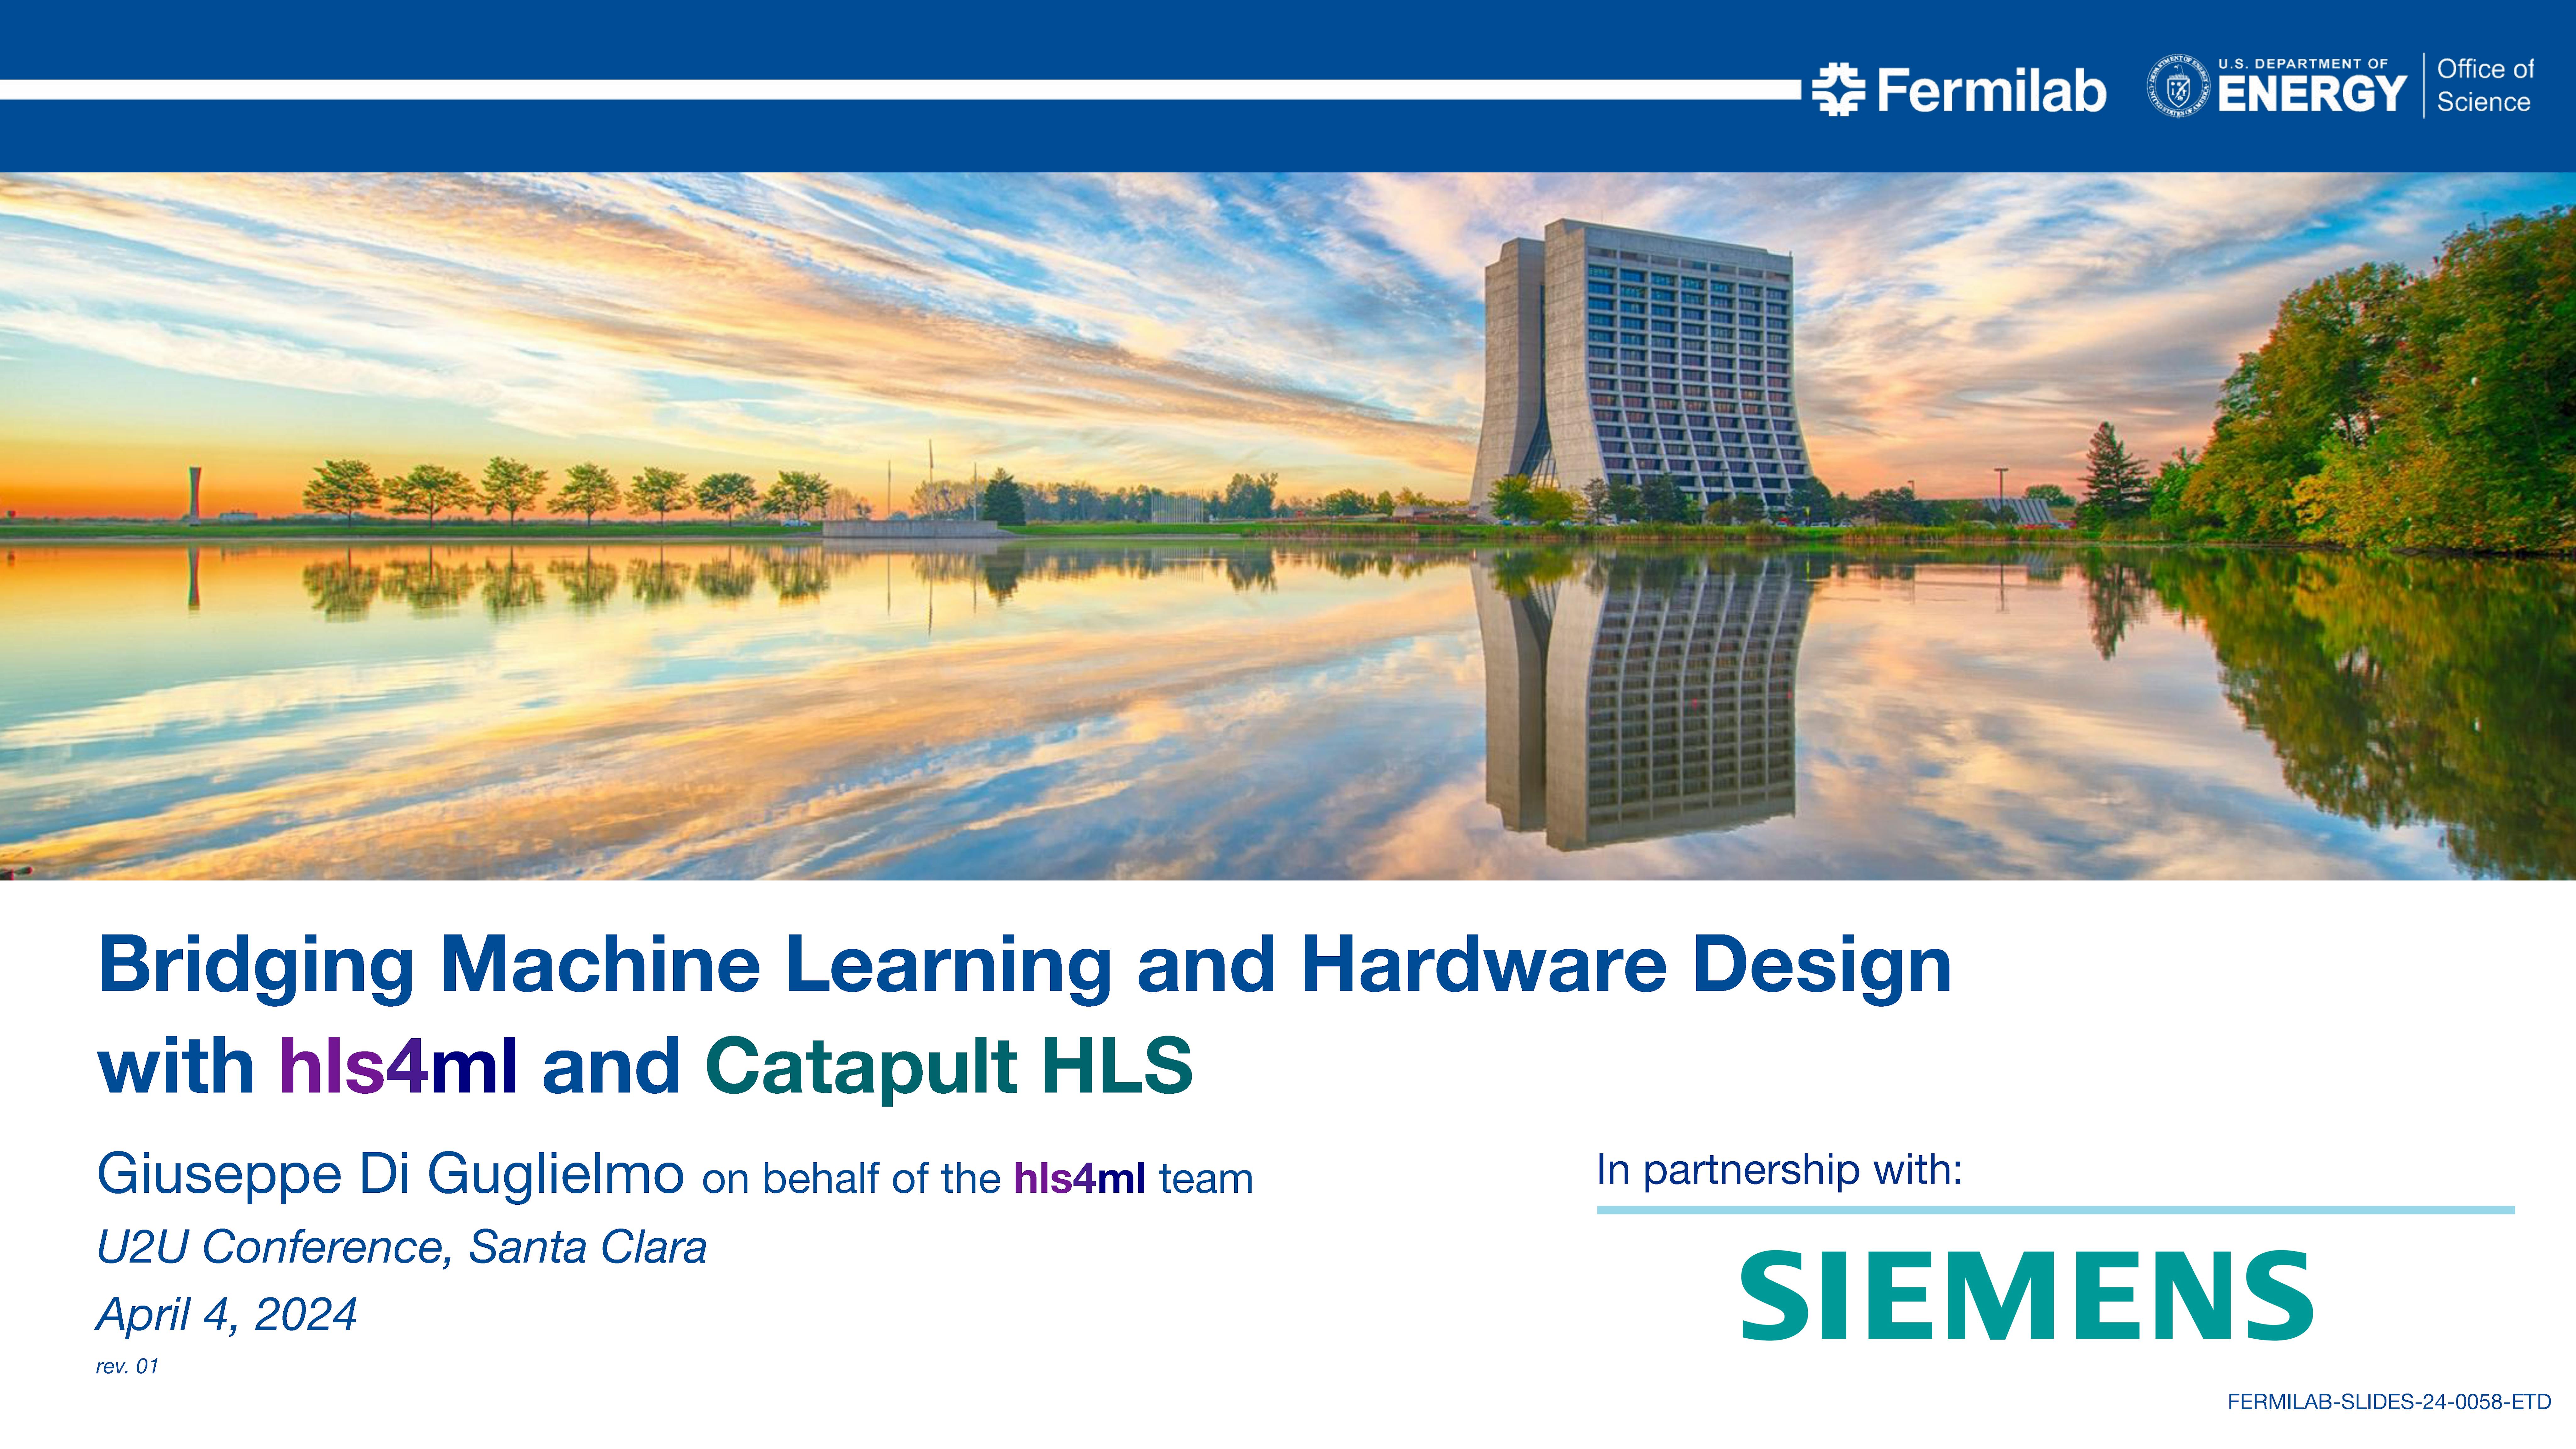 Fermilab introduces their partnership with Siemens to provide full integration with the Catapult HLS design and verification flow, describe some projects that have already benefitted from hls4ml, and outline future directions.